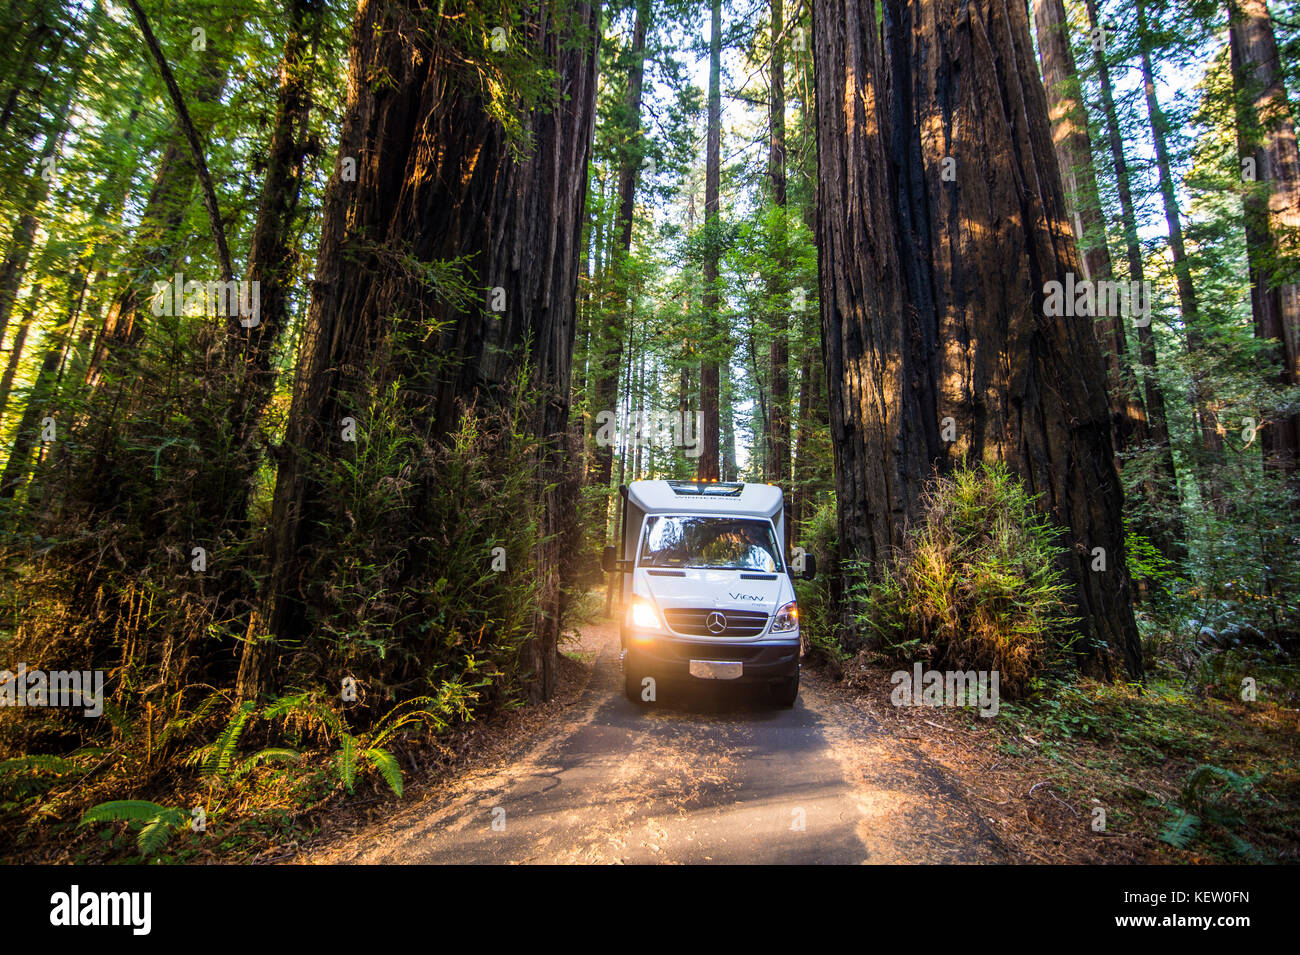 Camervan driving through a small alley between two redwoods, Avenue of the Giants, Northern California, USA Stock Photo